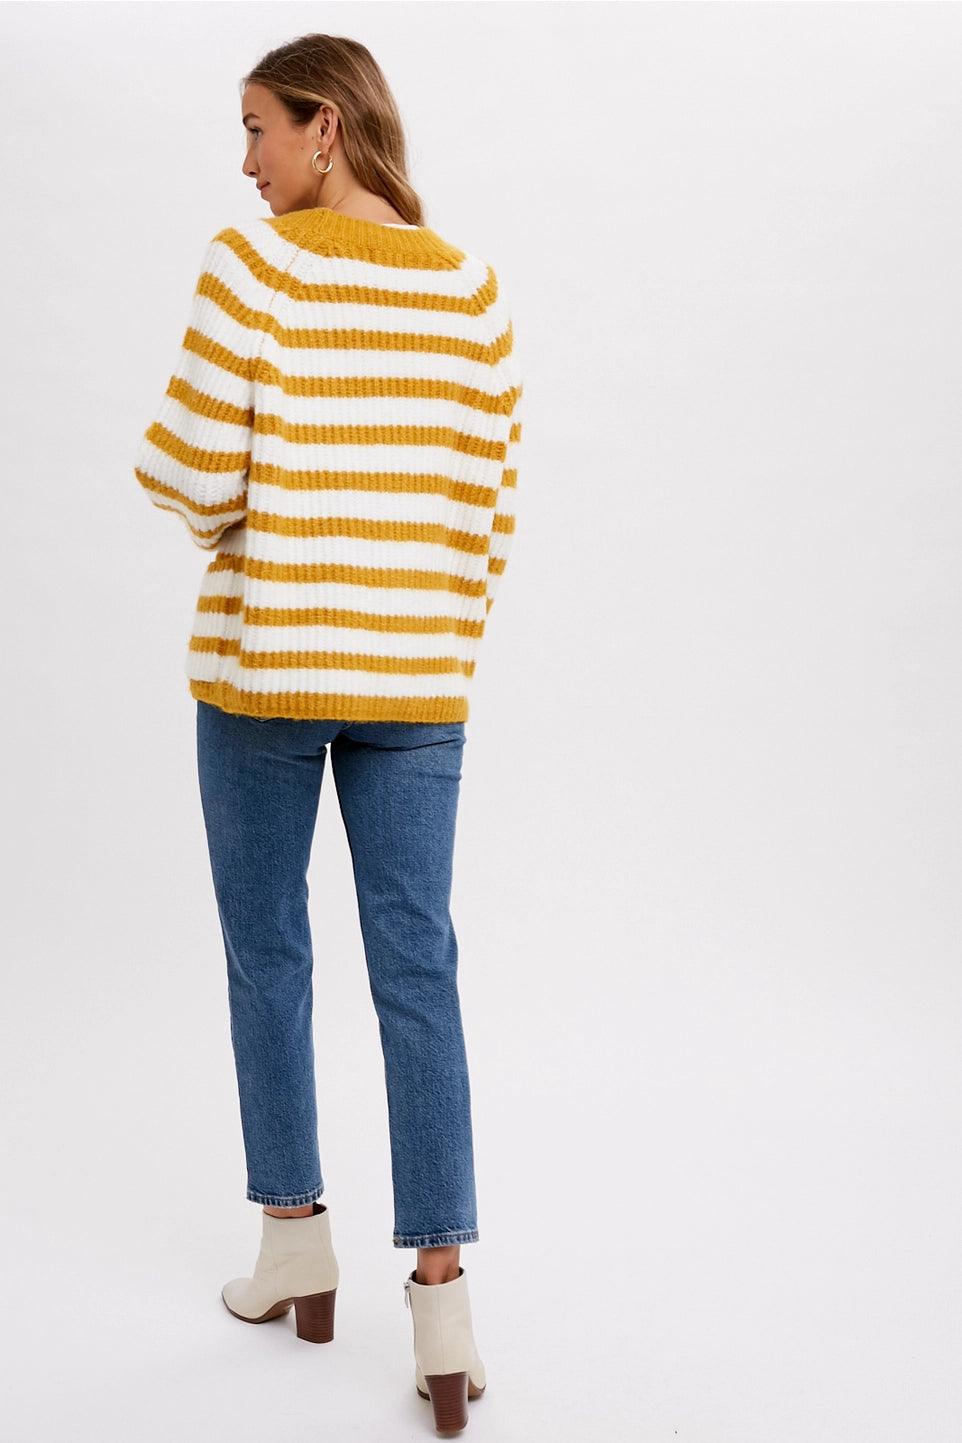 Laila Stripped Sweater - Sprig Flower Co